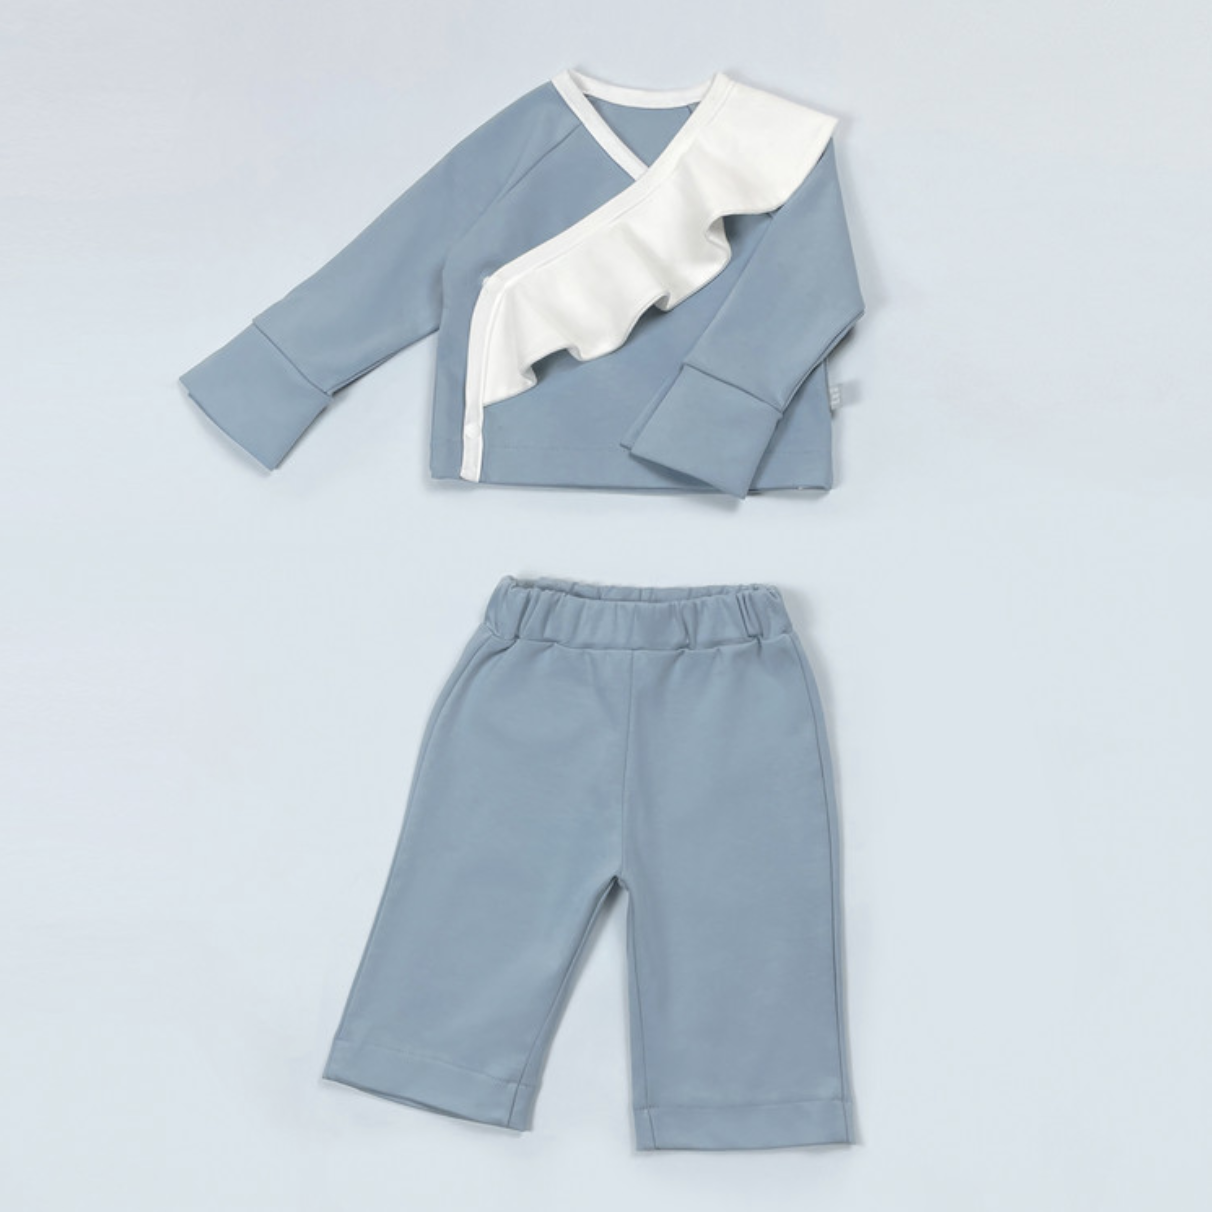 Ruffle Bodysuit Long-sleeves + Pants Set (Misty Blue): Sensuous bodysuit with wavy ruffle and versatile pants for a formal look